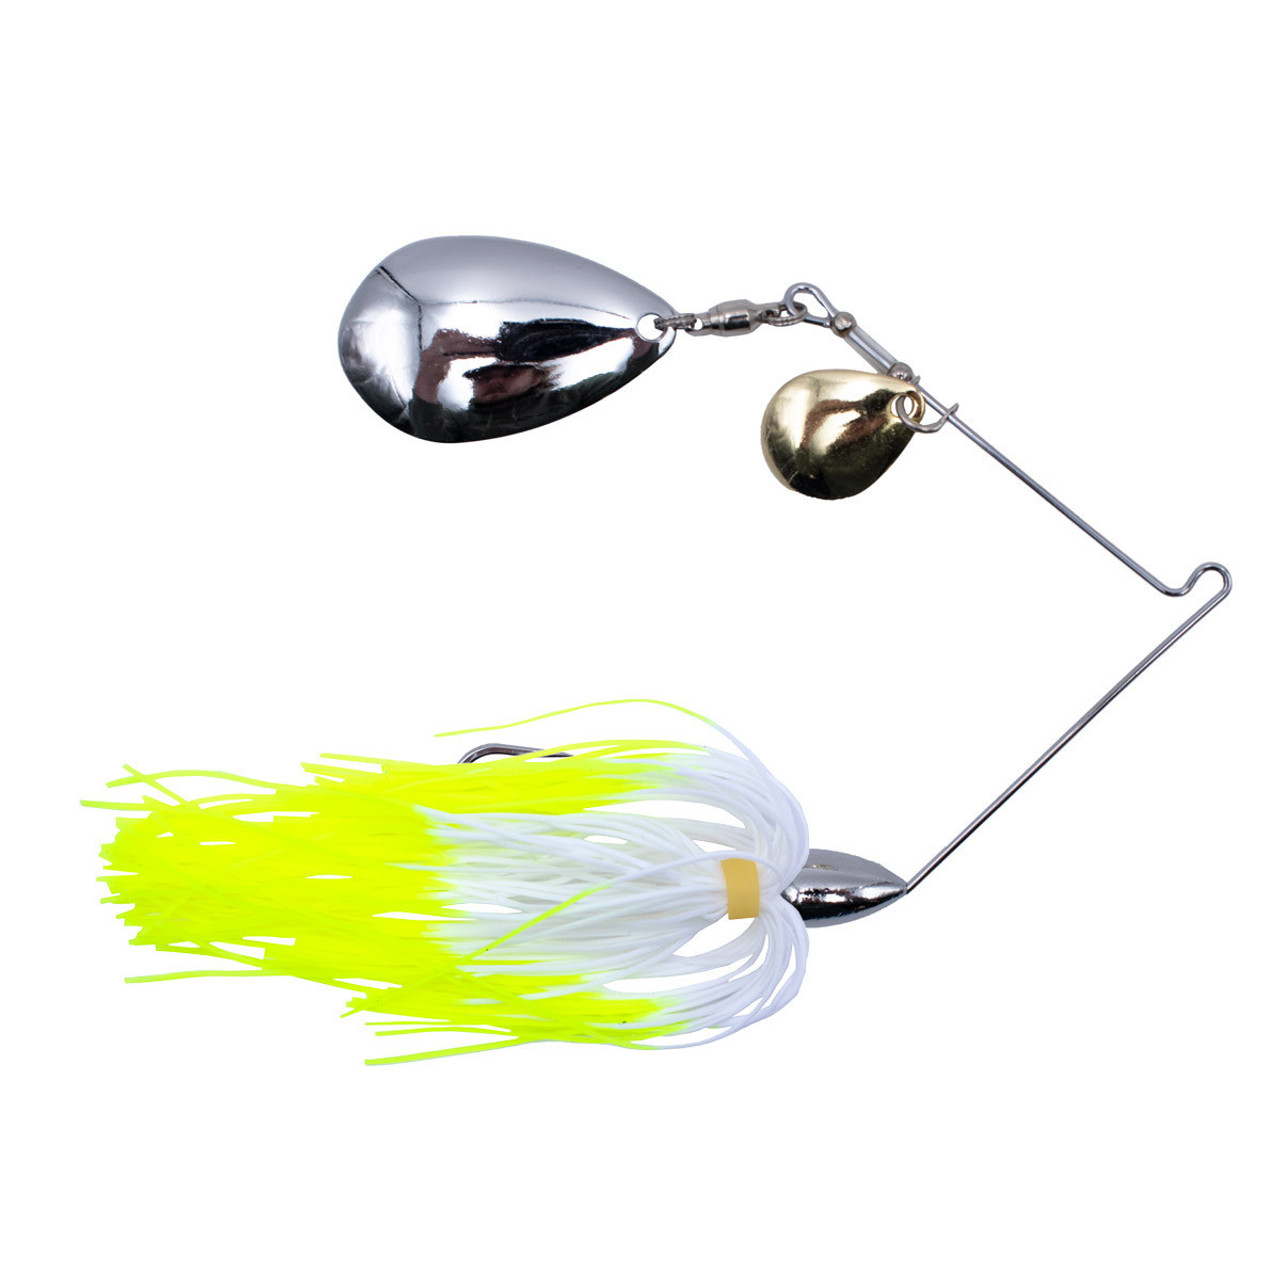 Rogers Go-2 Spinnerbait Colorado Indy